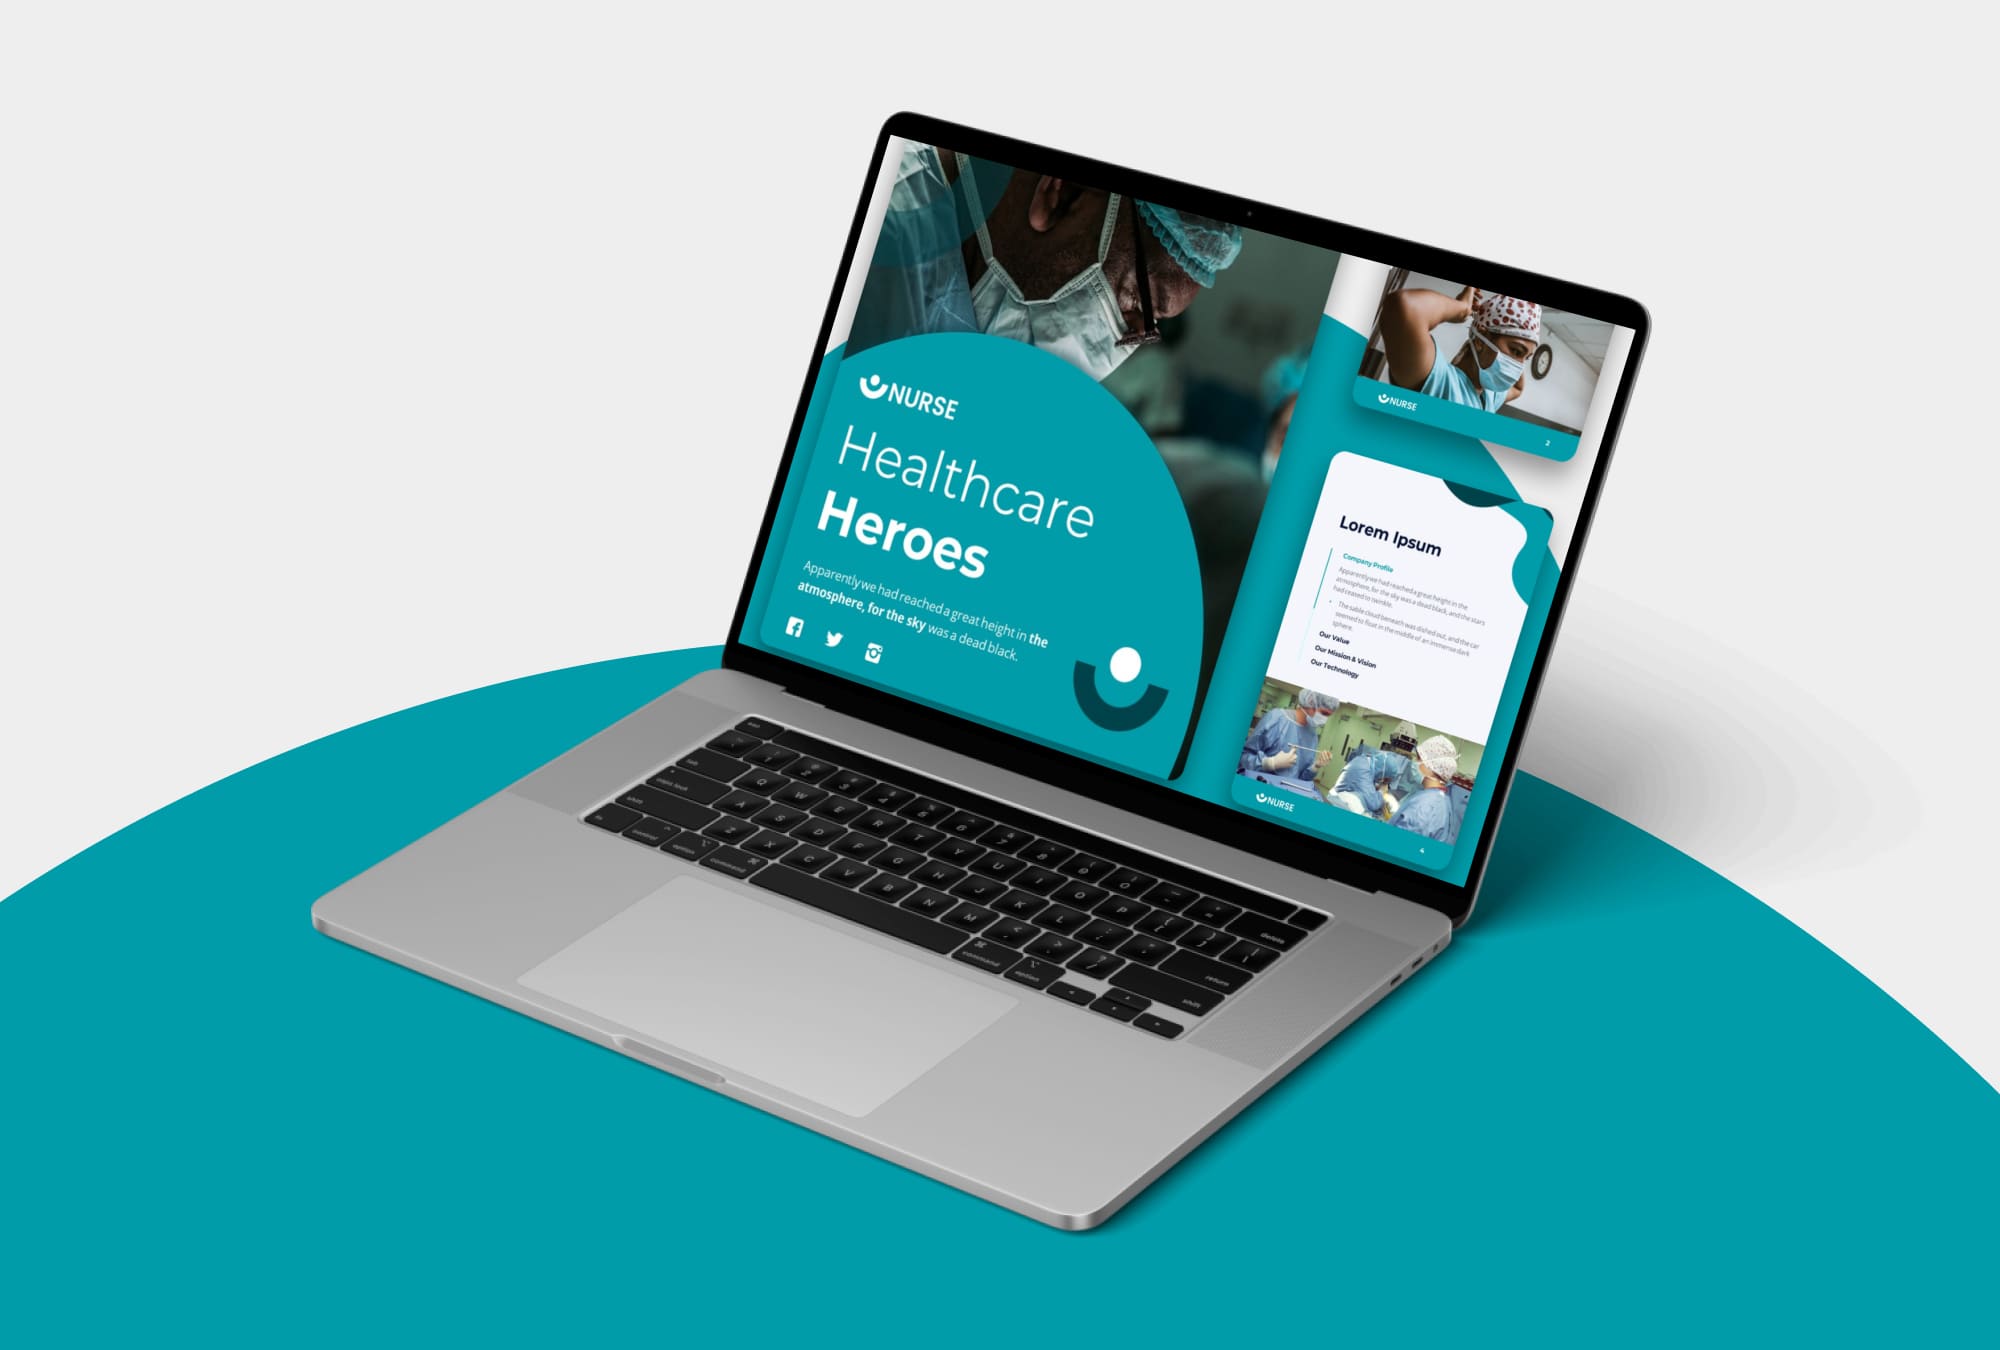 Preview Healthcare Heroes Presentation Template on the laptop.